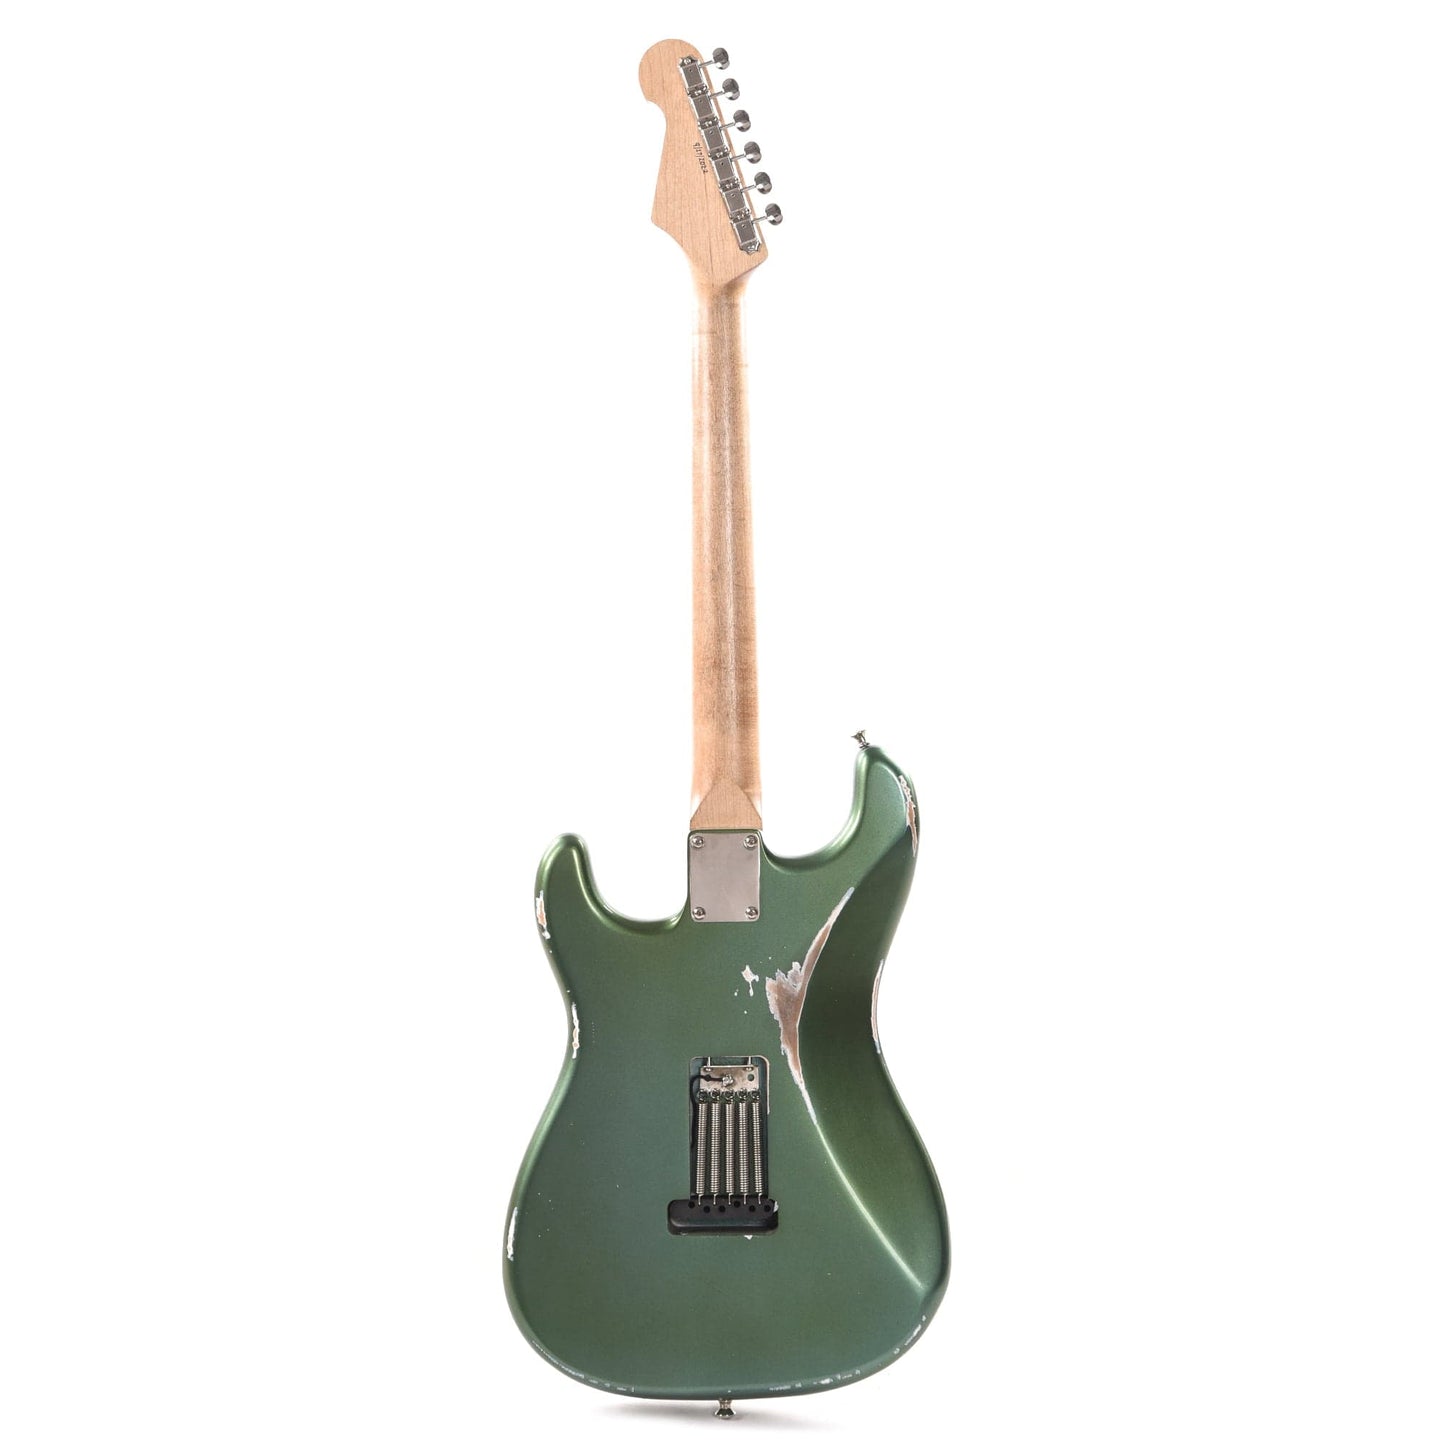 Waterslide S-Style Coodercaster Aged 'Greened Out Blue' Nitro Finish Electric Guitars / Solid Body